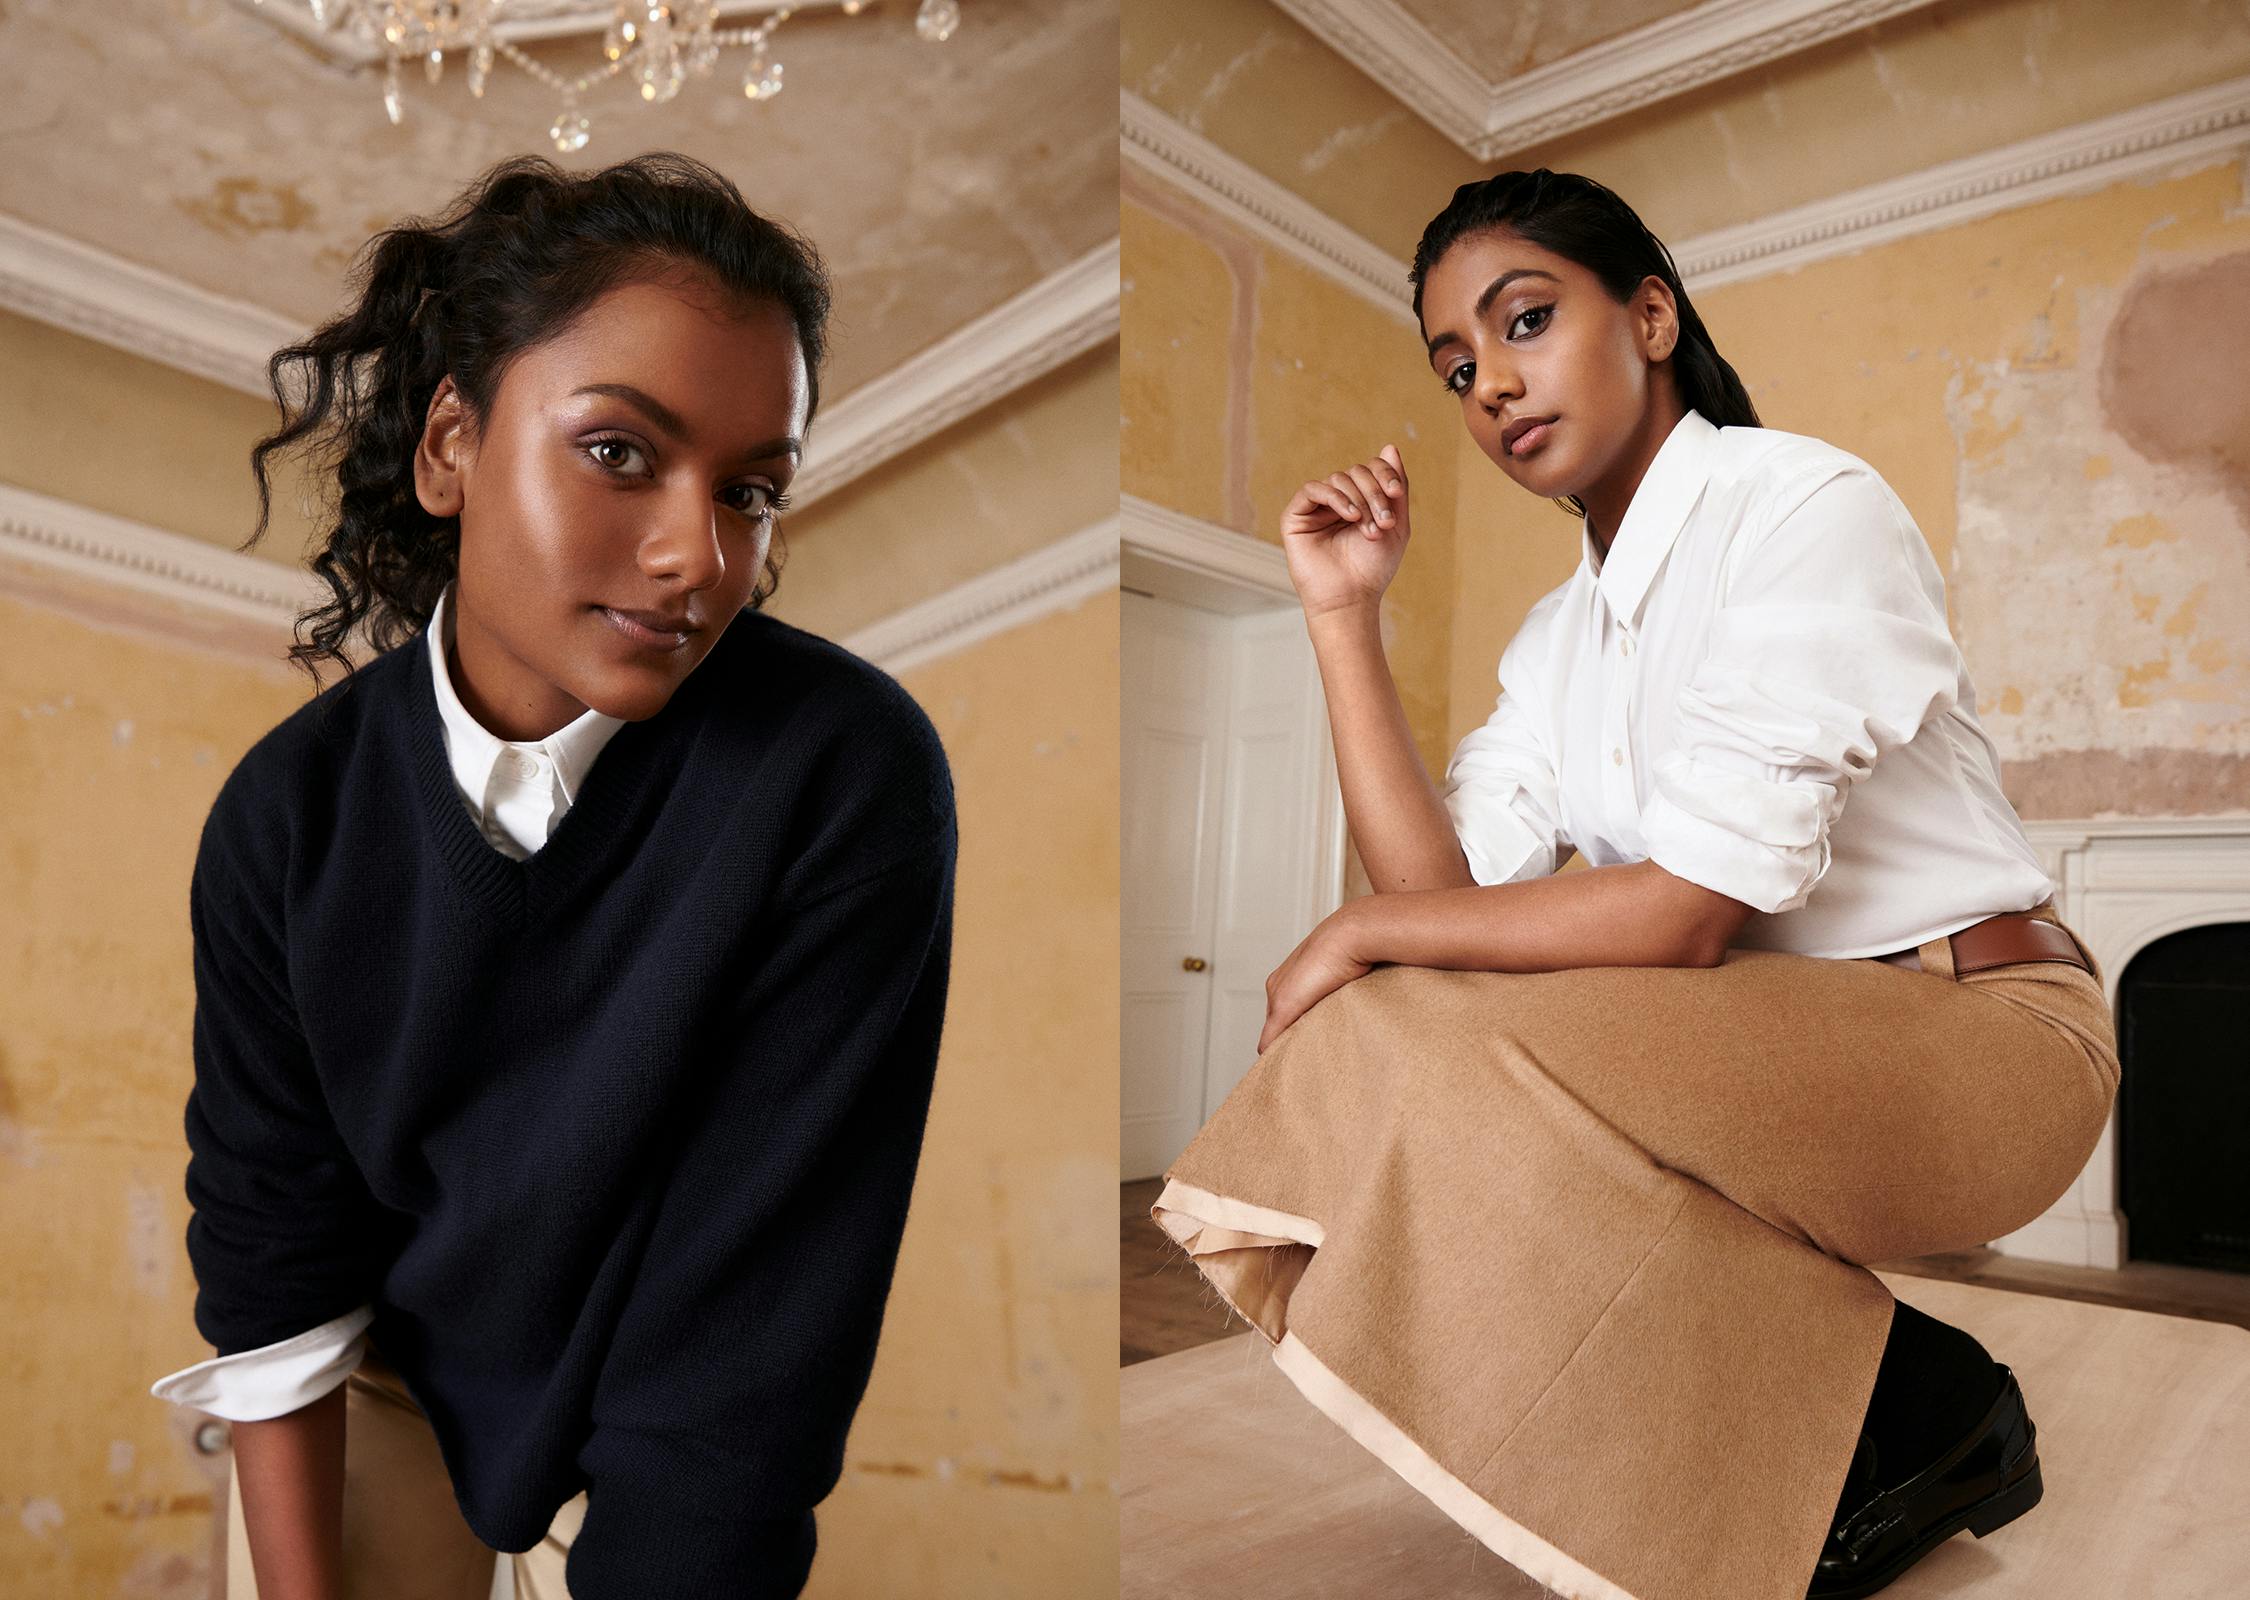 Simone Ashley and Charithra Chandran in a diptych. Ashley wears a dark sweater and white shirt. Chandran wears khakis and a white shirt. 